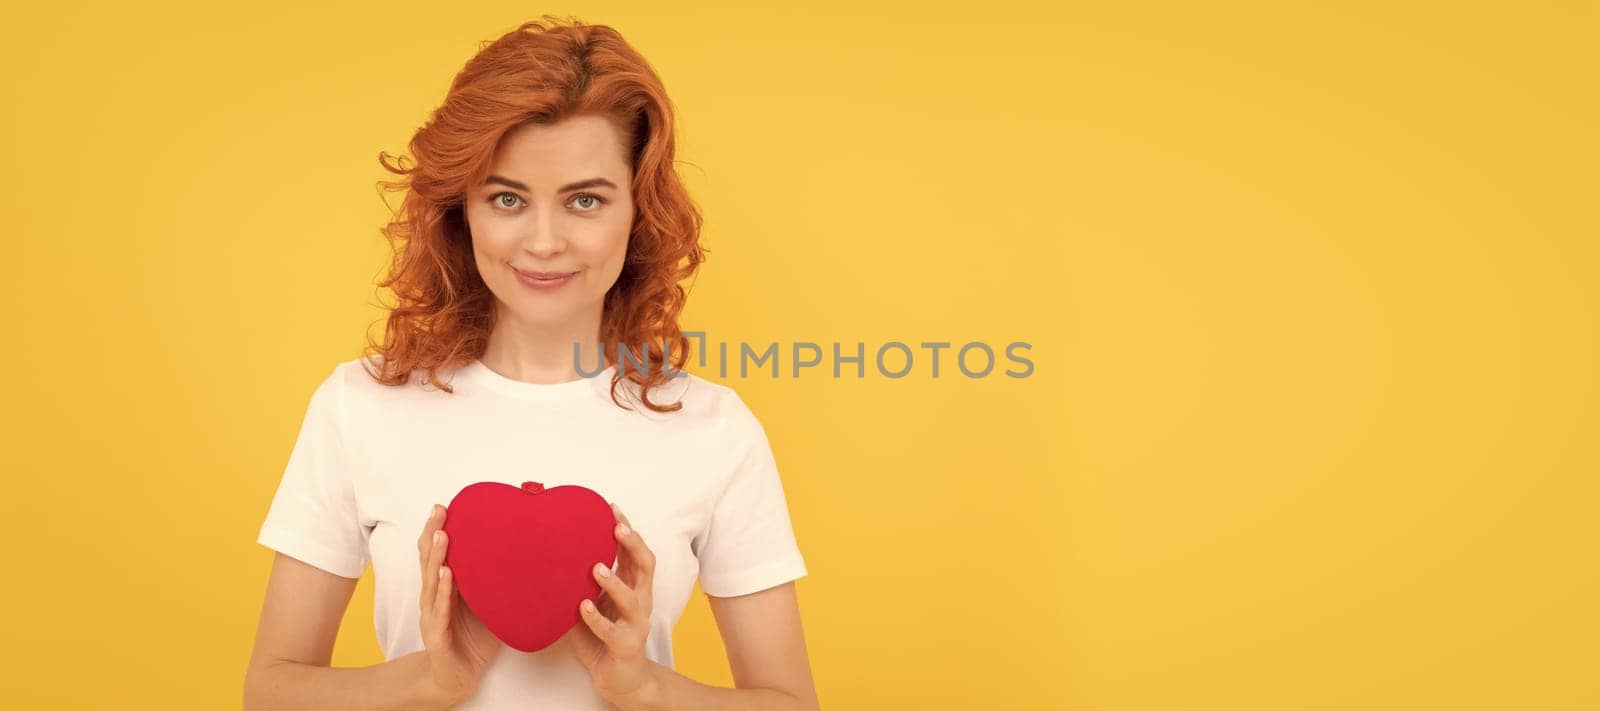 smiling redhead woman hold love heart on yellow background, 14 february. Woman isolated face portrait, banner with copy space